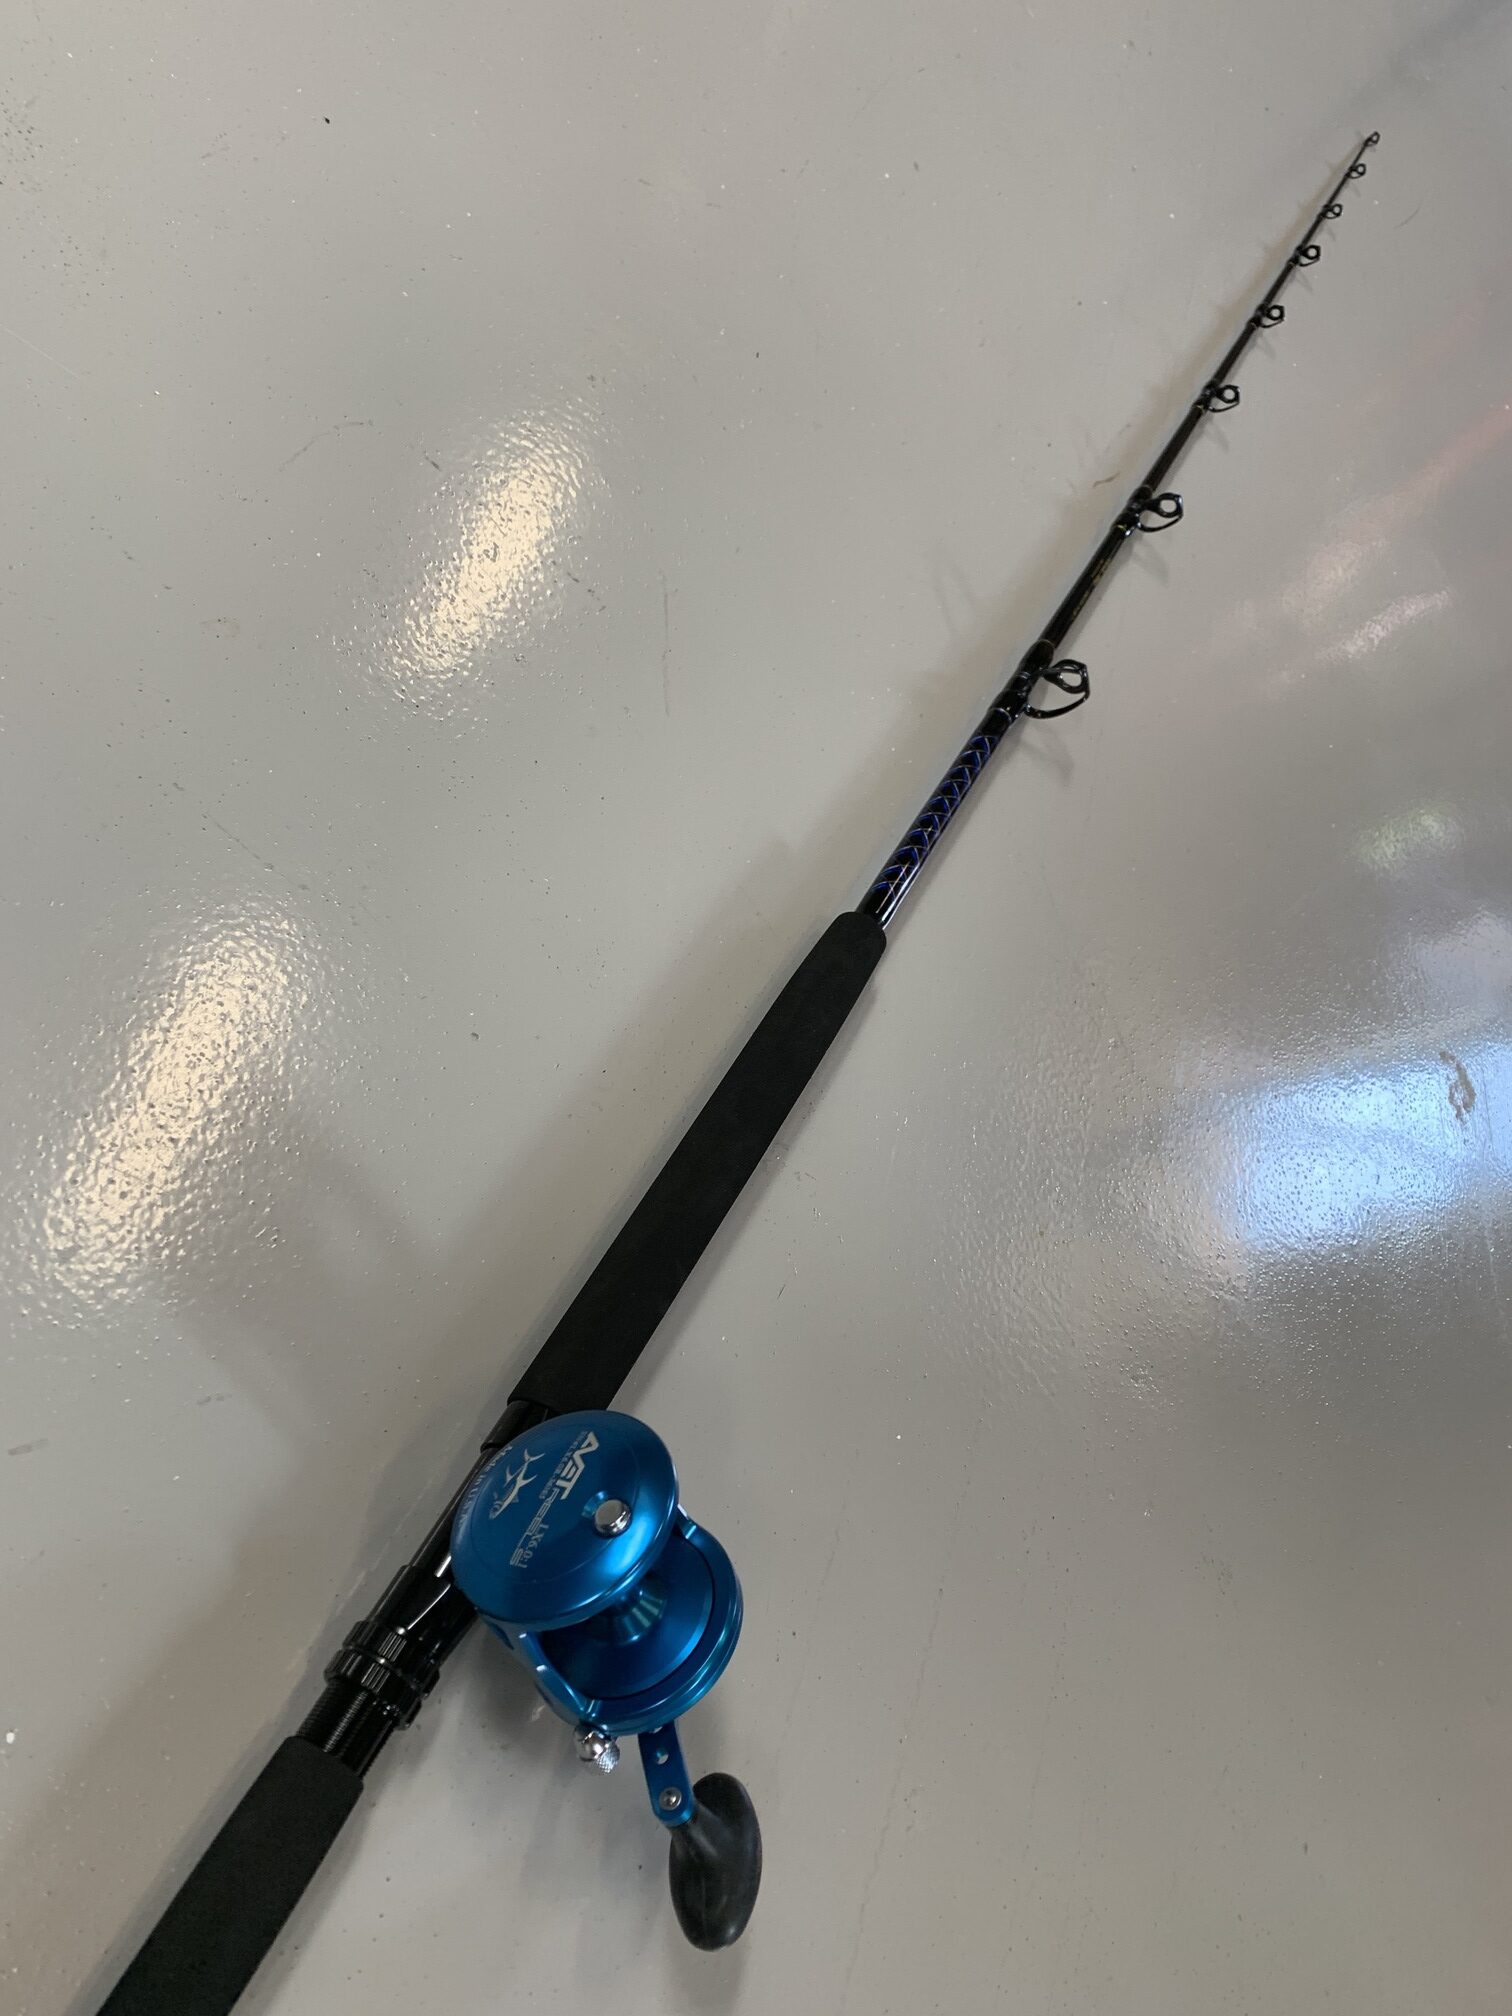 7' Kingfish 20-50 Live Bait and Bottom Fishing Rod with Avet LX G2 Gold Reel